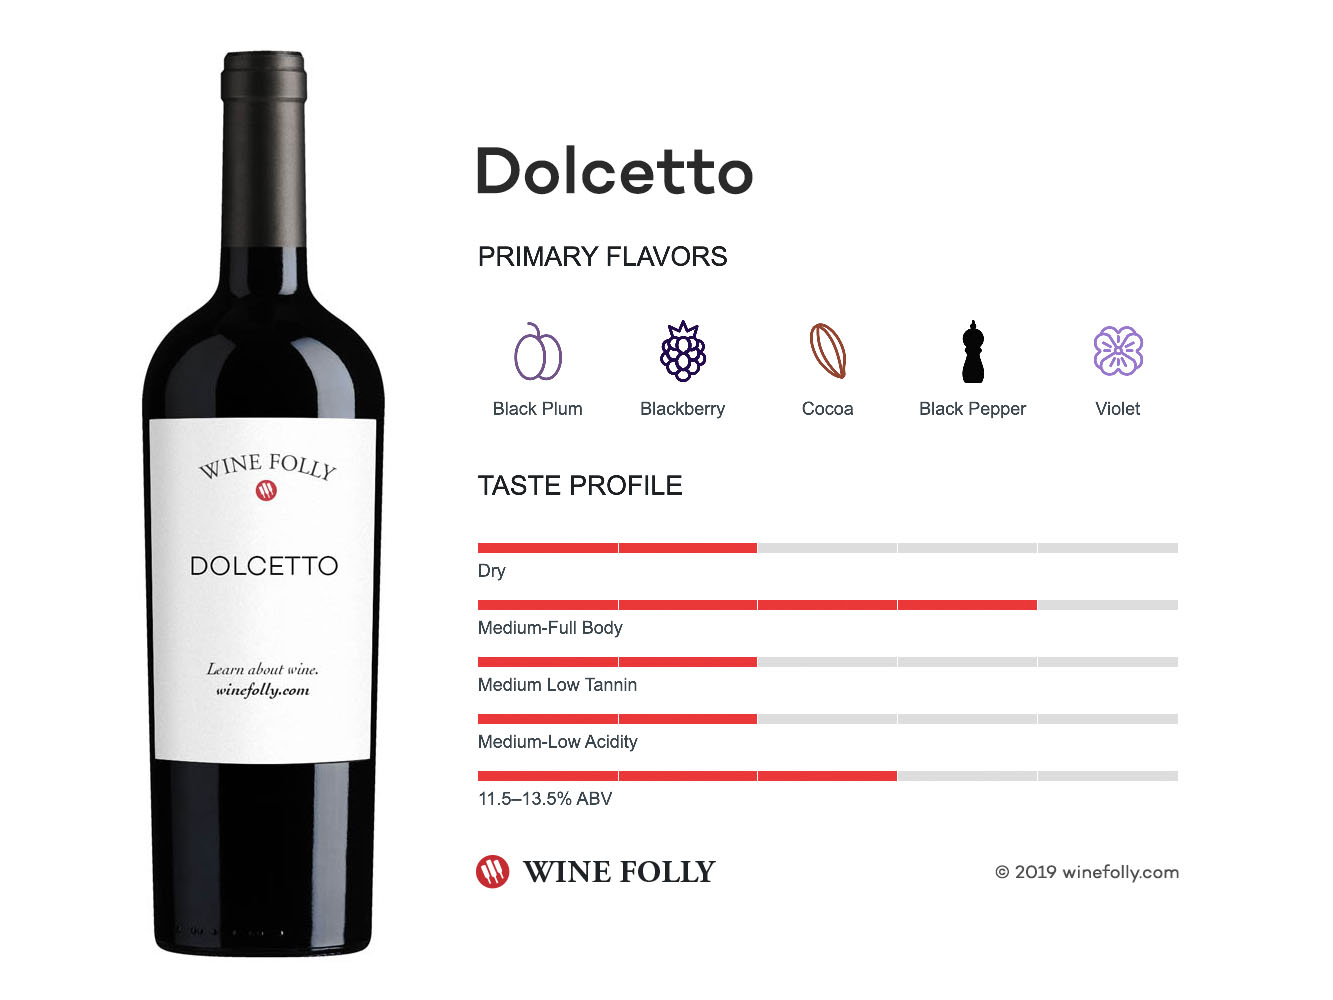 Dolcetto wine taste profile - infographic by Wine Folly